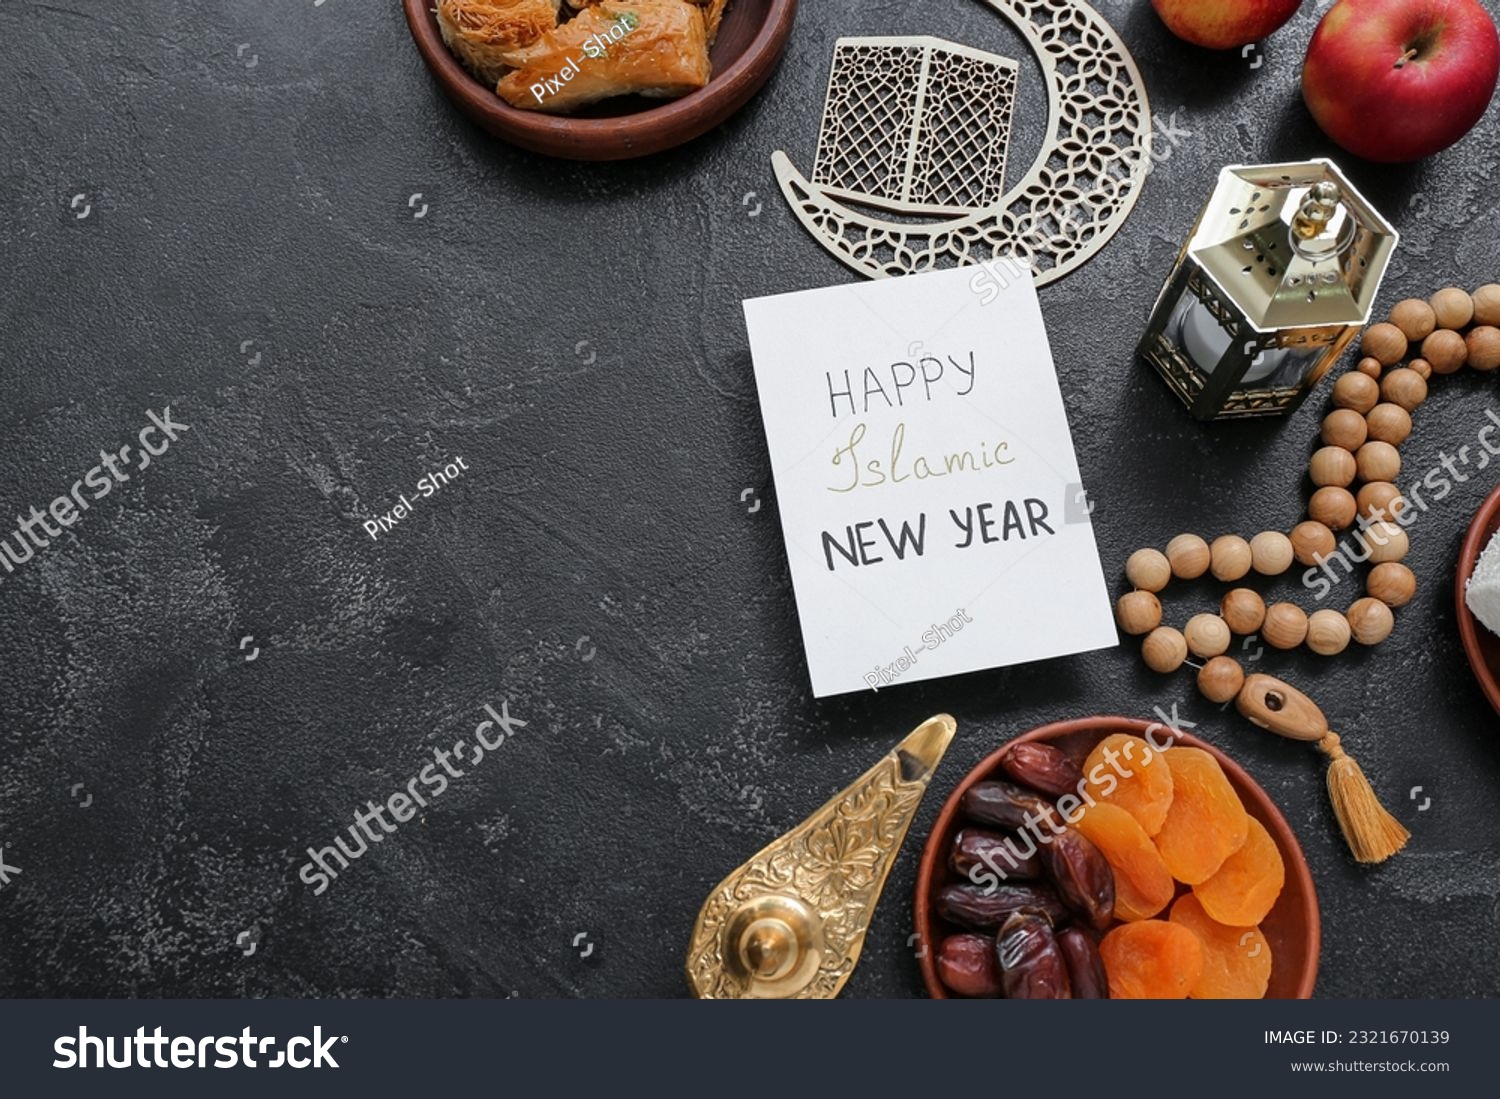 Card with text HAPPY ISLAMIC NEW YEAR, dried fruits and tasbih on dark background #2321670139